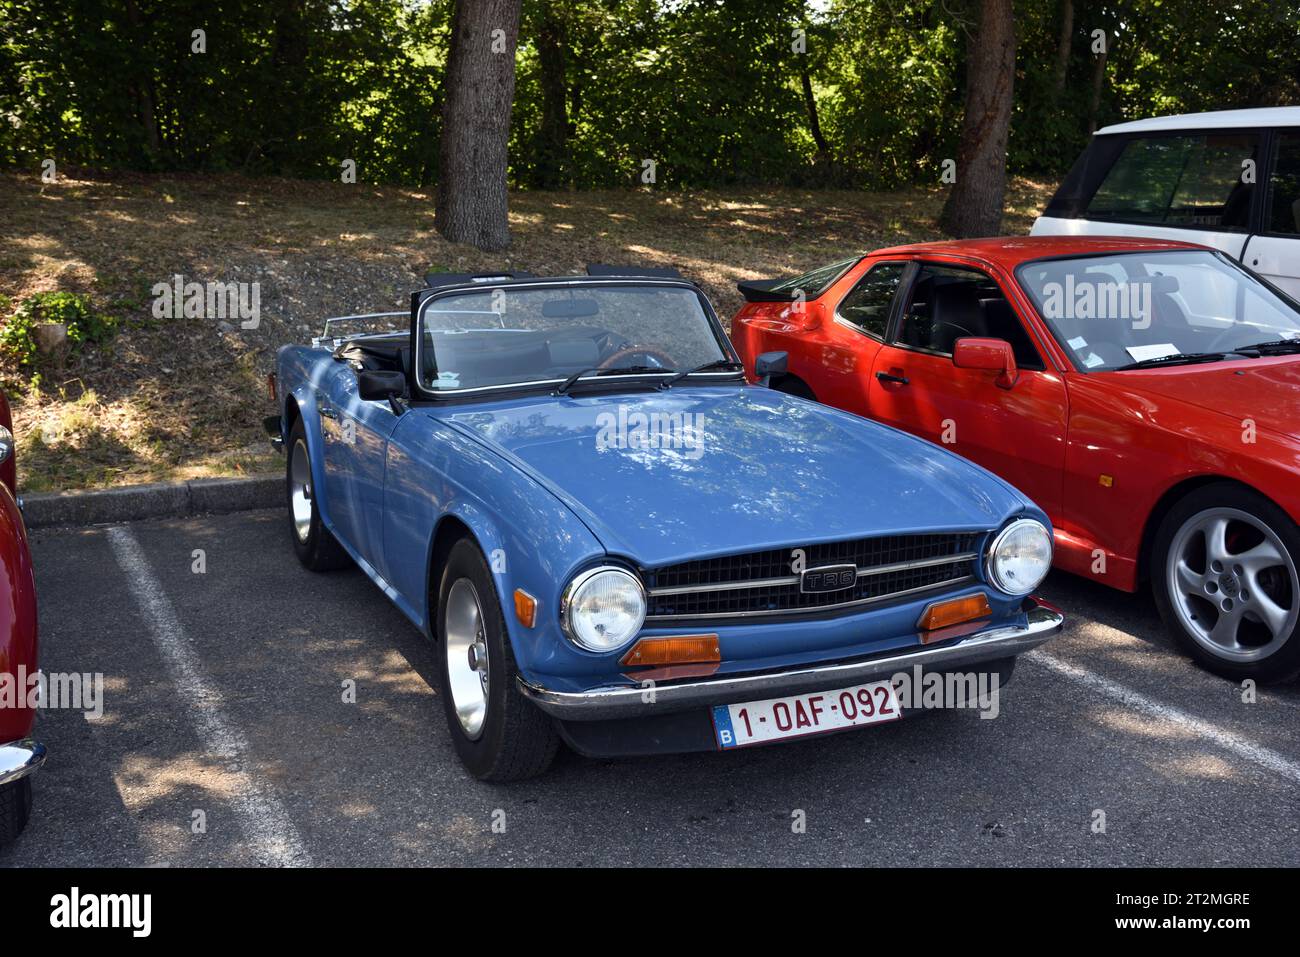 Blue Triumph TR6 produced by the Triumph Motor Company between 1968 and 1976 Stock Photo